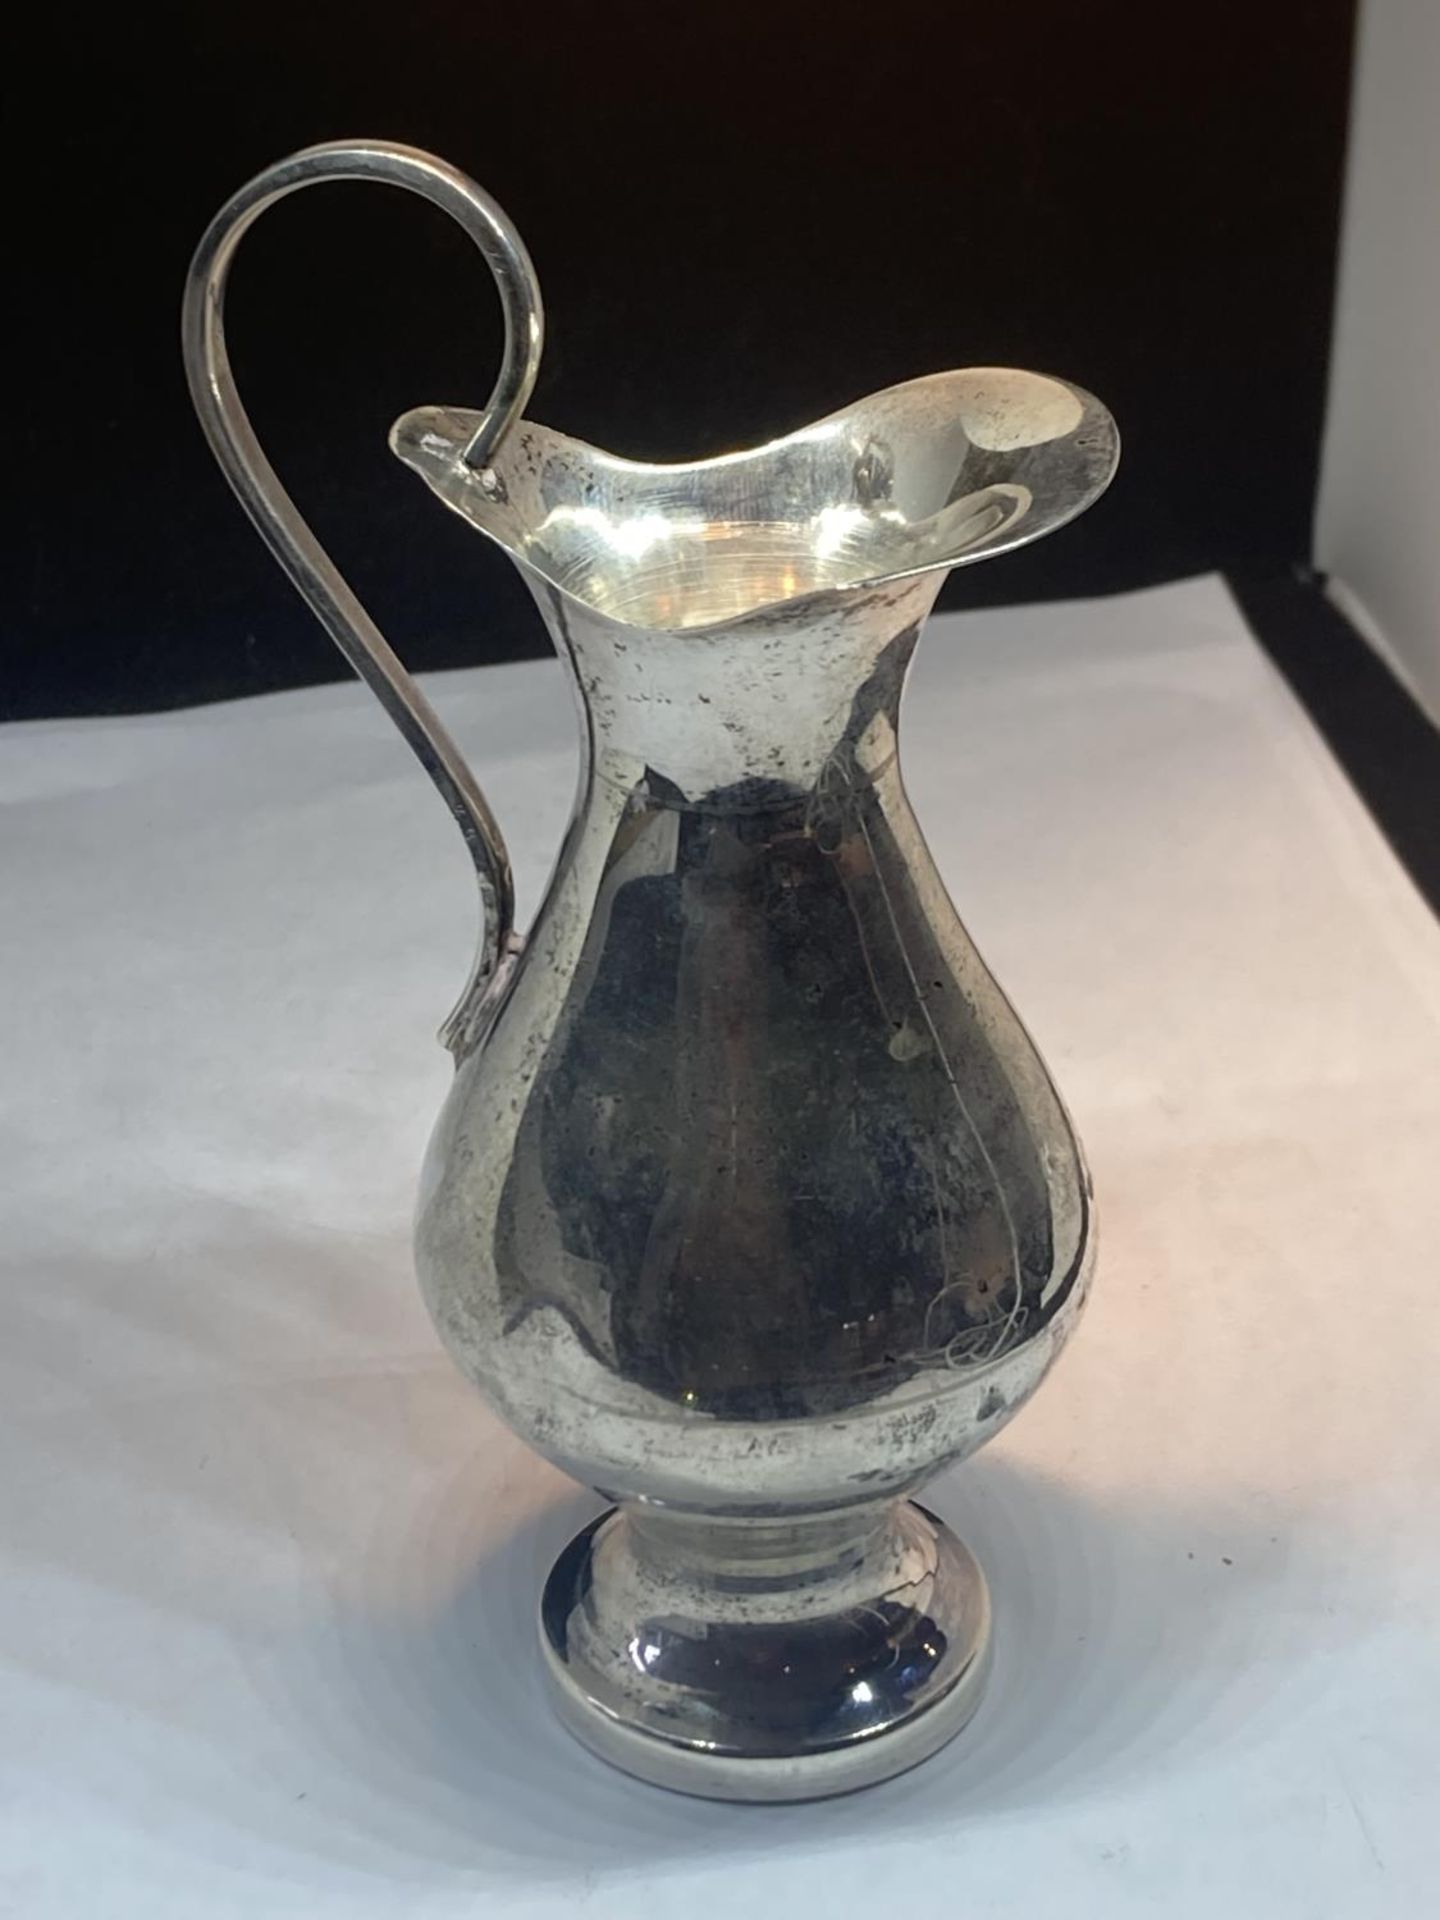 A MARKED 900 SILVER JUG GROSS WEIGHT 92.1 GRAMS - Image 2 of 3